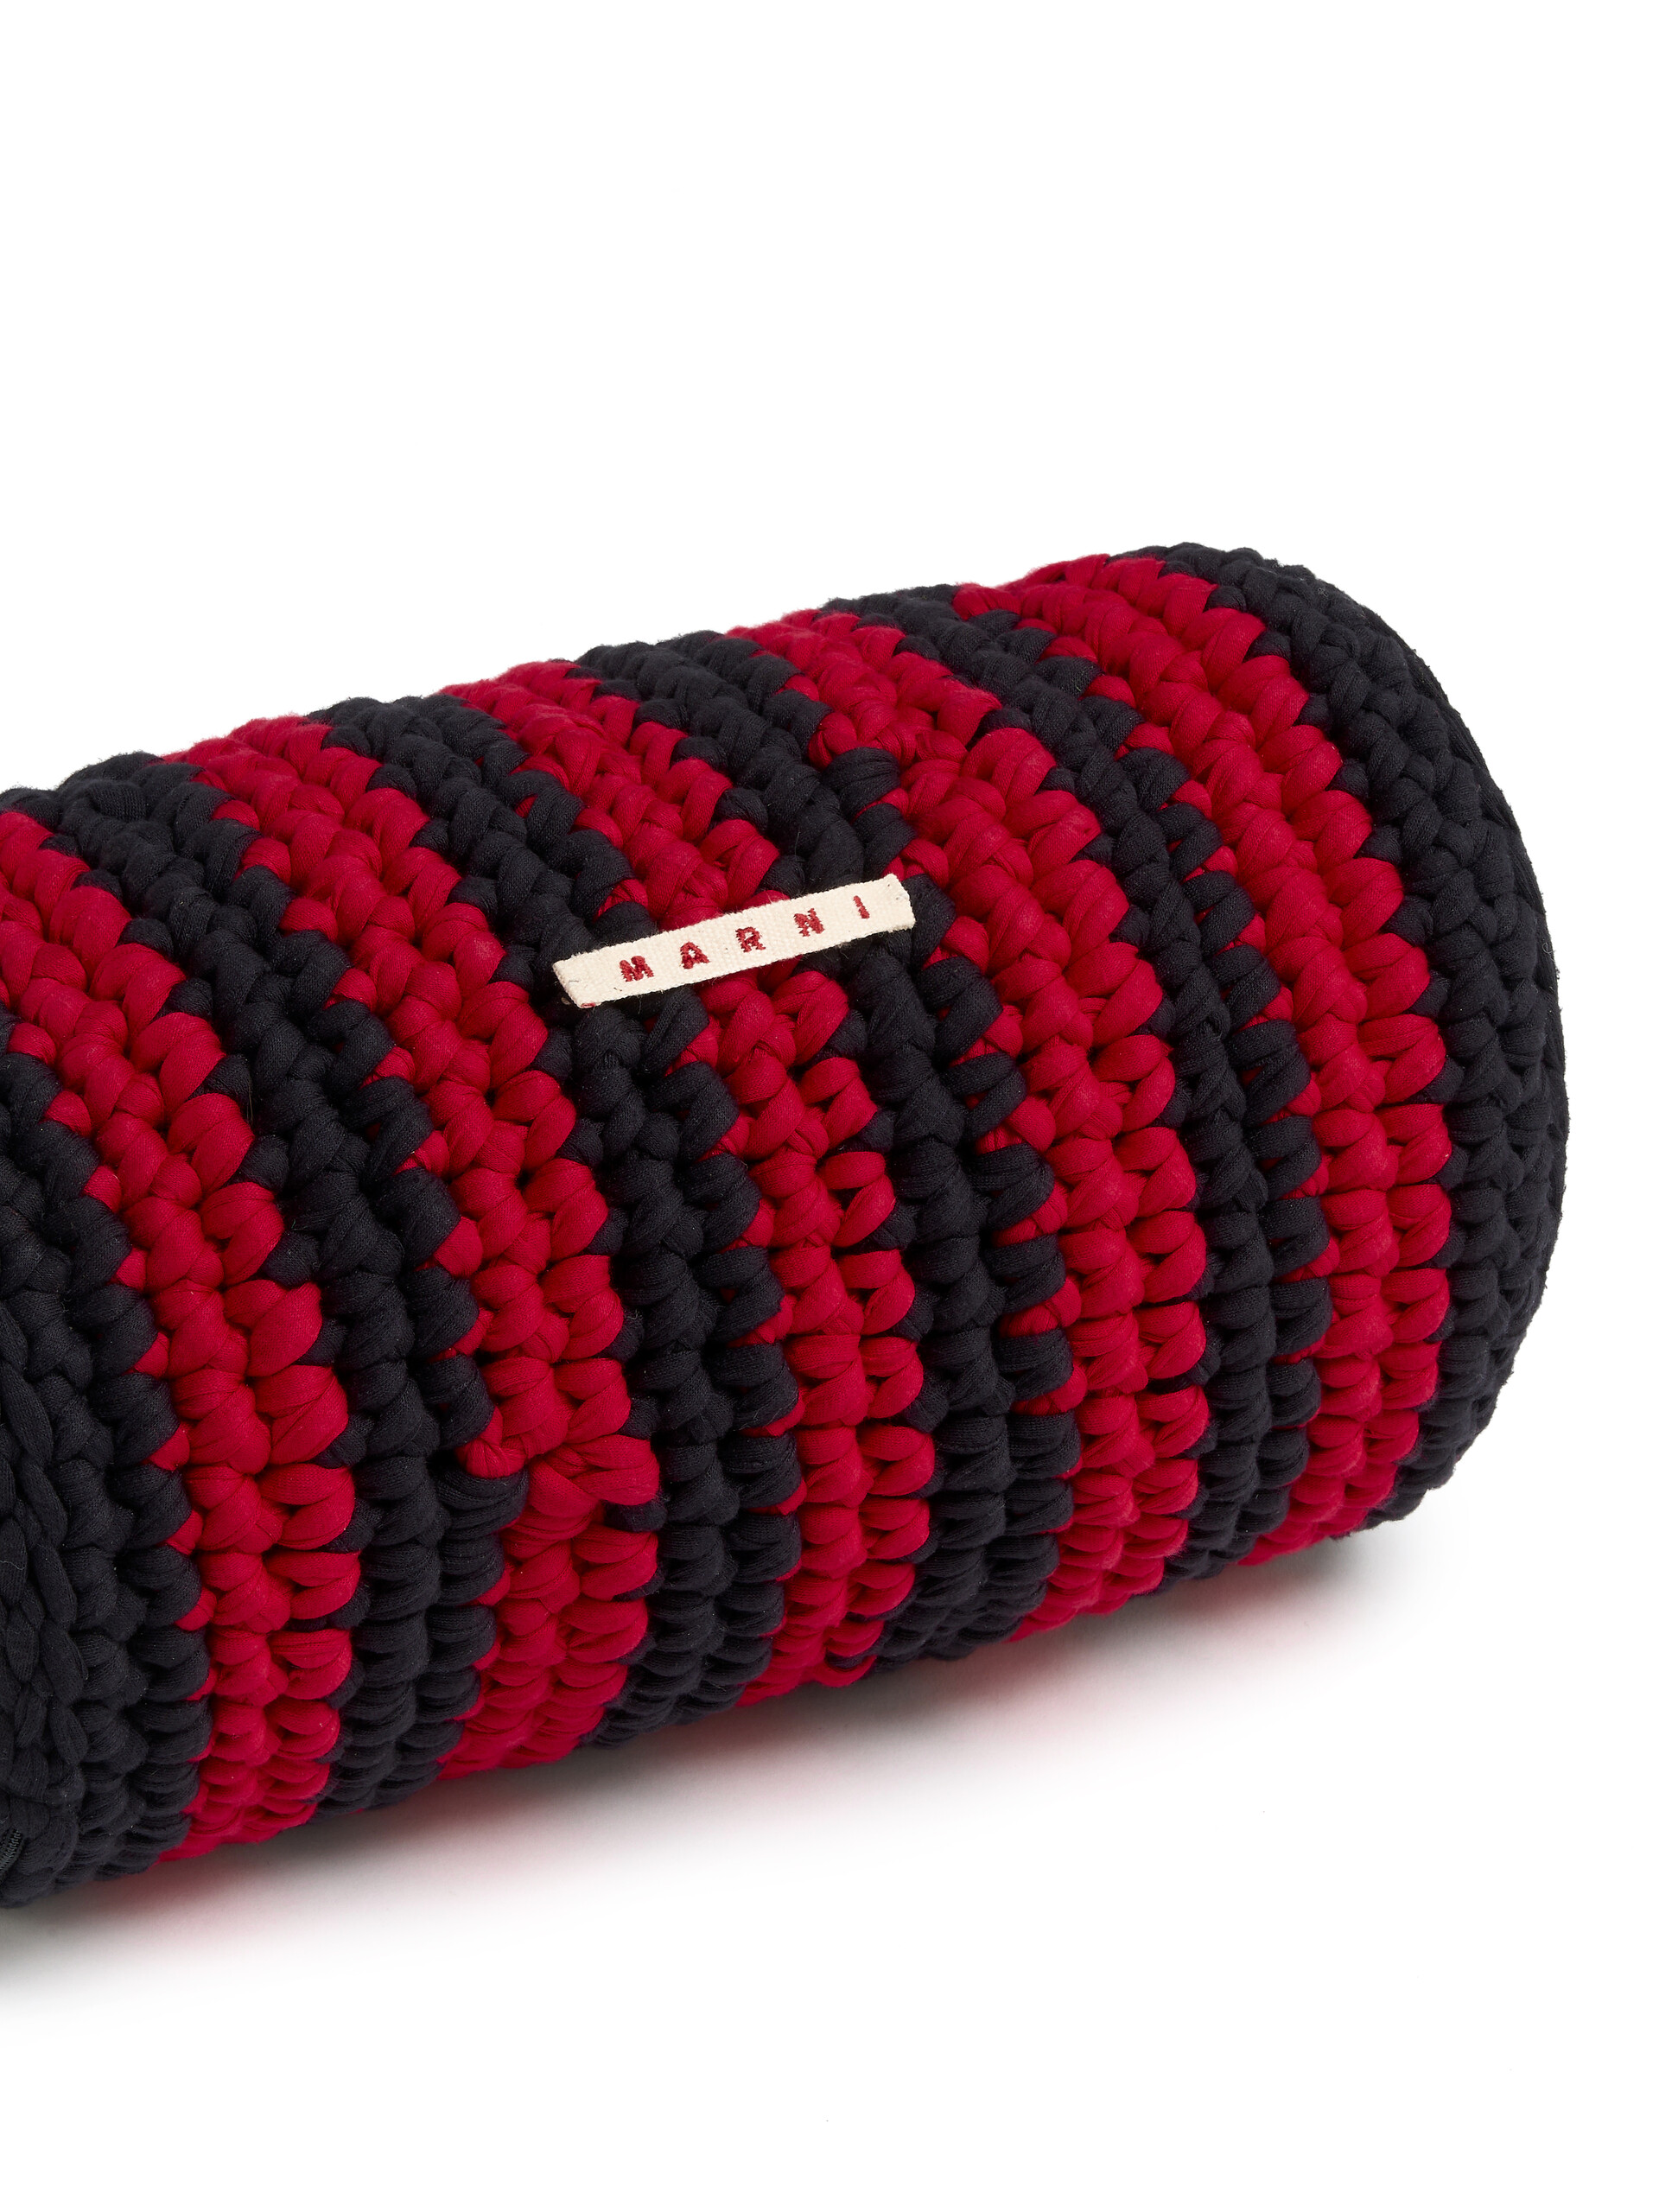 Red and black striped MARNI MARKET tech wool bolster cushion - Furniture - Image 3